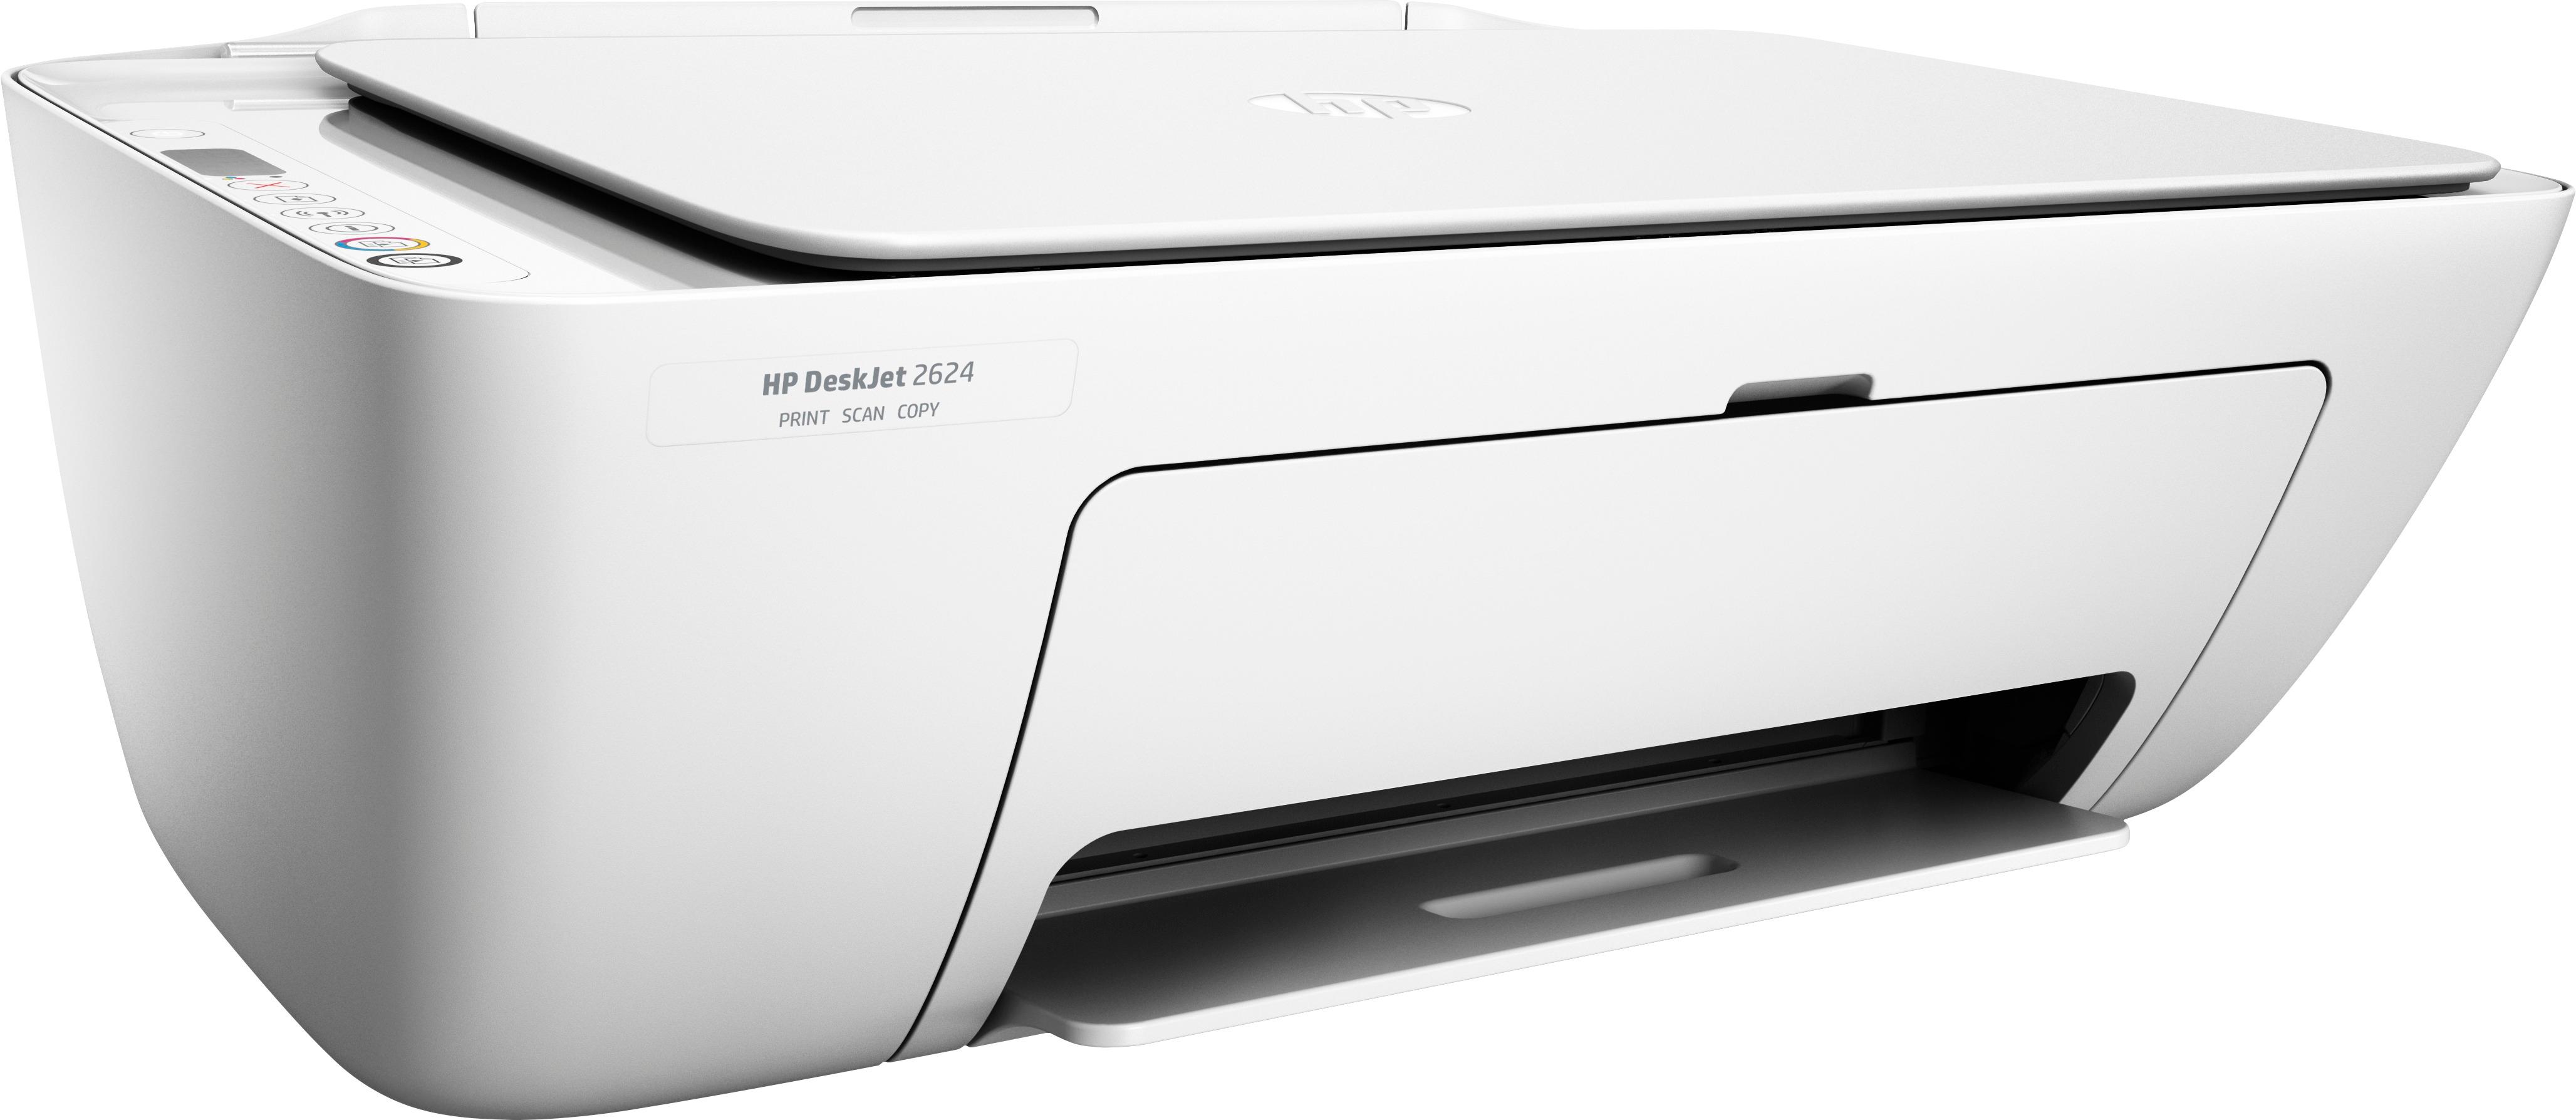 Inkjet printer HP DeskJet 2720e All-in-one Color A4 HP Smart App - PS  Auction - We value the future - Largest in net auctions